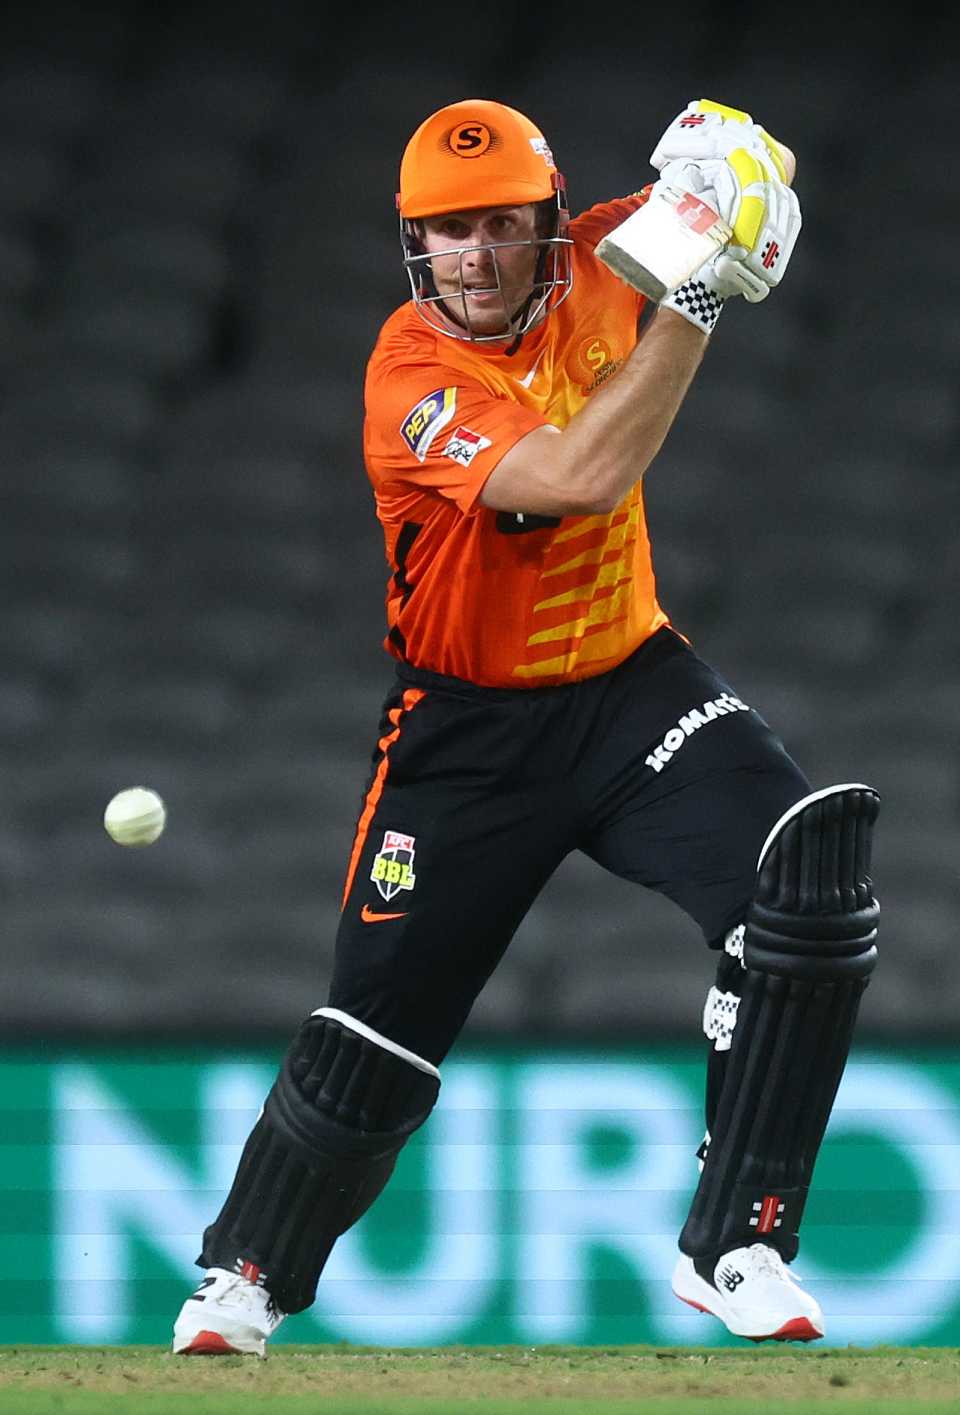 Mitchell Marsh cracks one towards the cover during his 34-ball 59